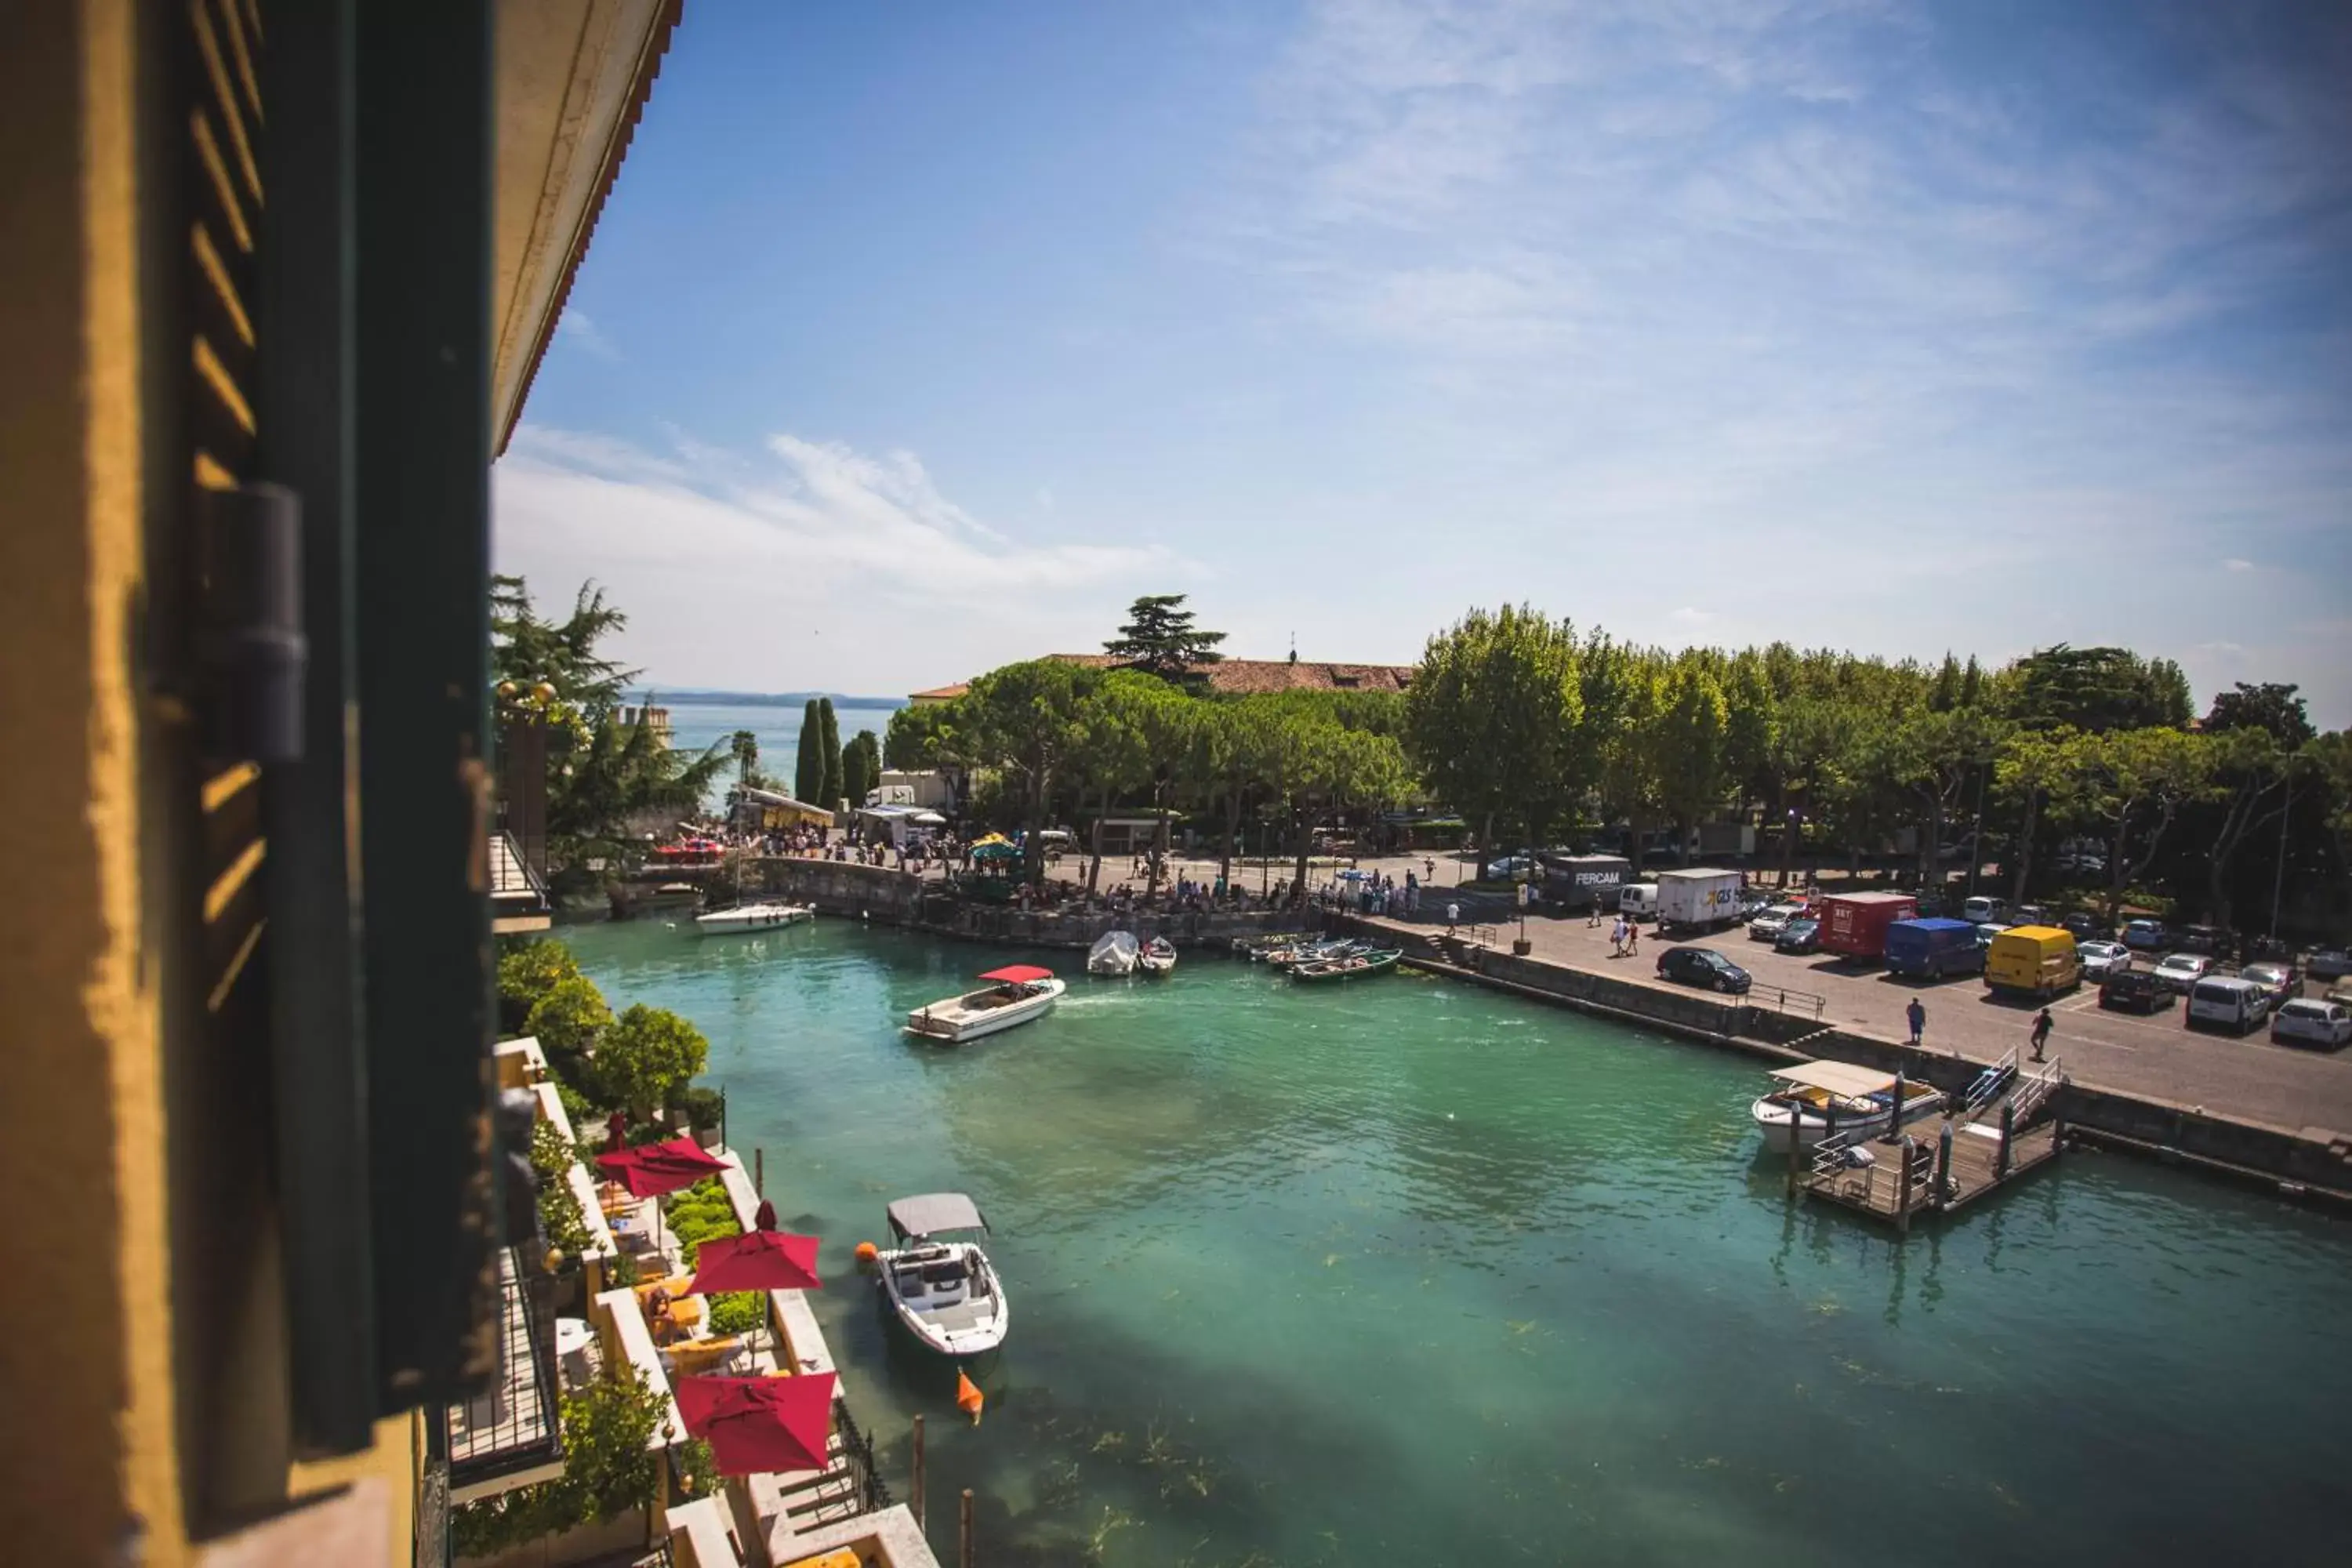 Lake view in Hotel Sirmione